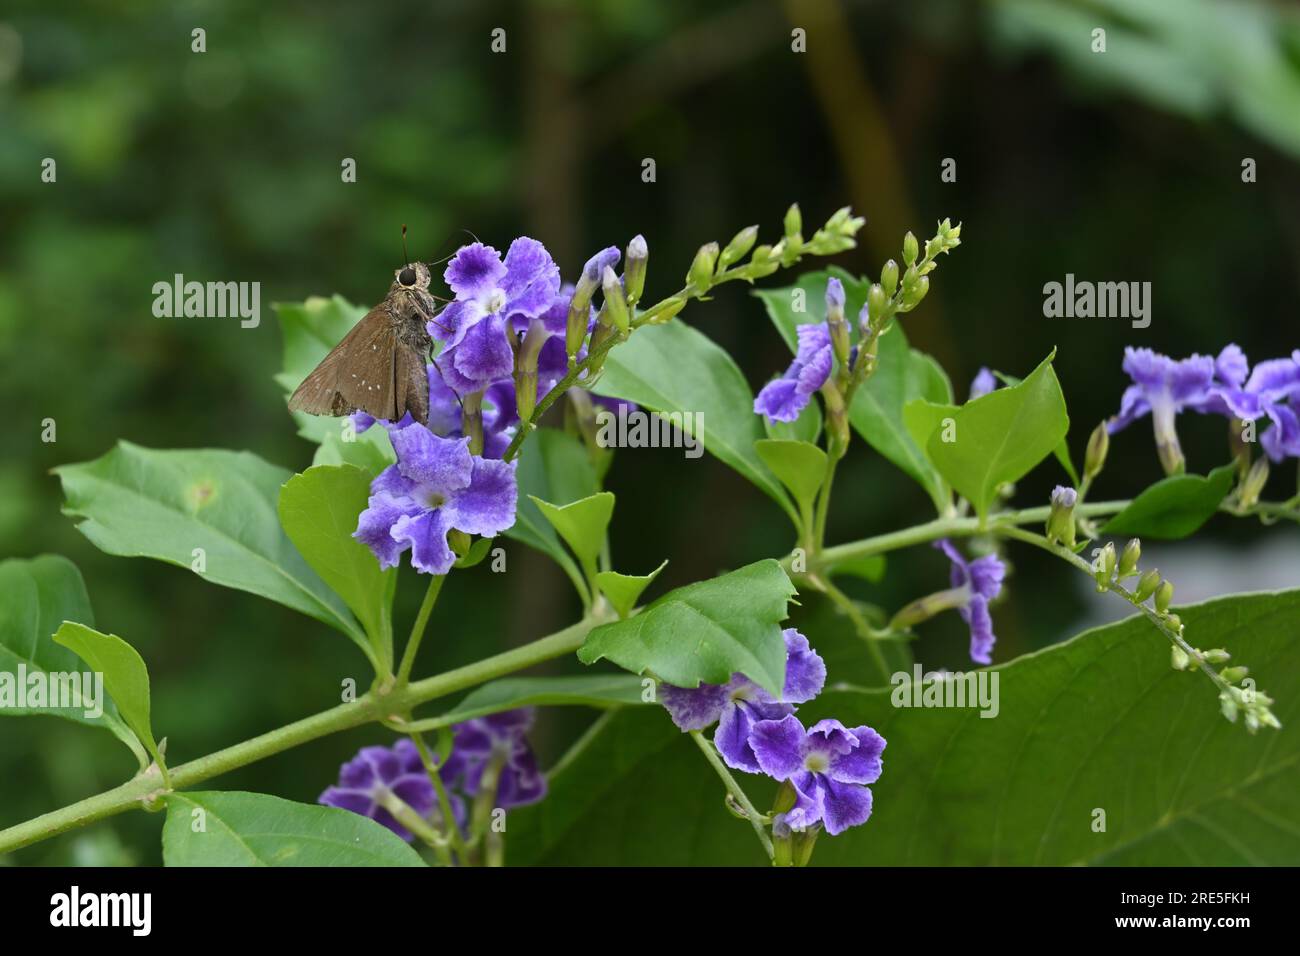 Close up view of a Small Branded Swift butterfly (Pelopidas Mathias) sitting on a purple color flower Stock Photo